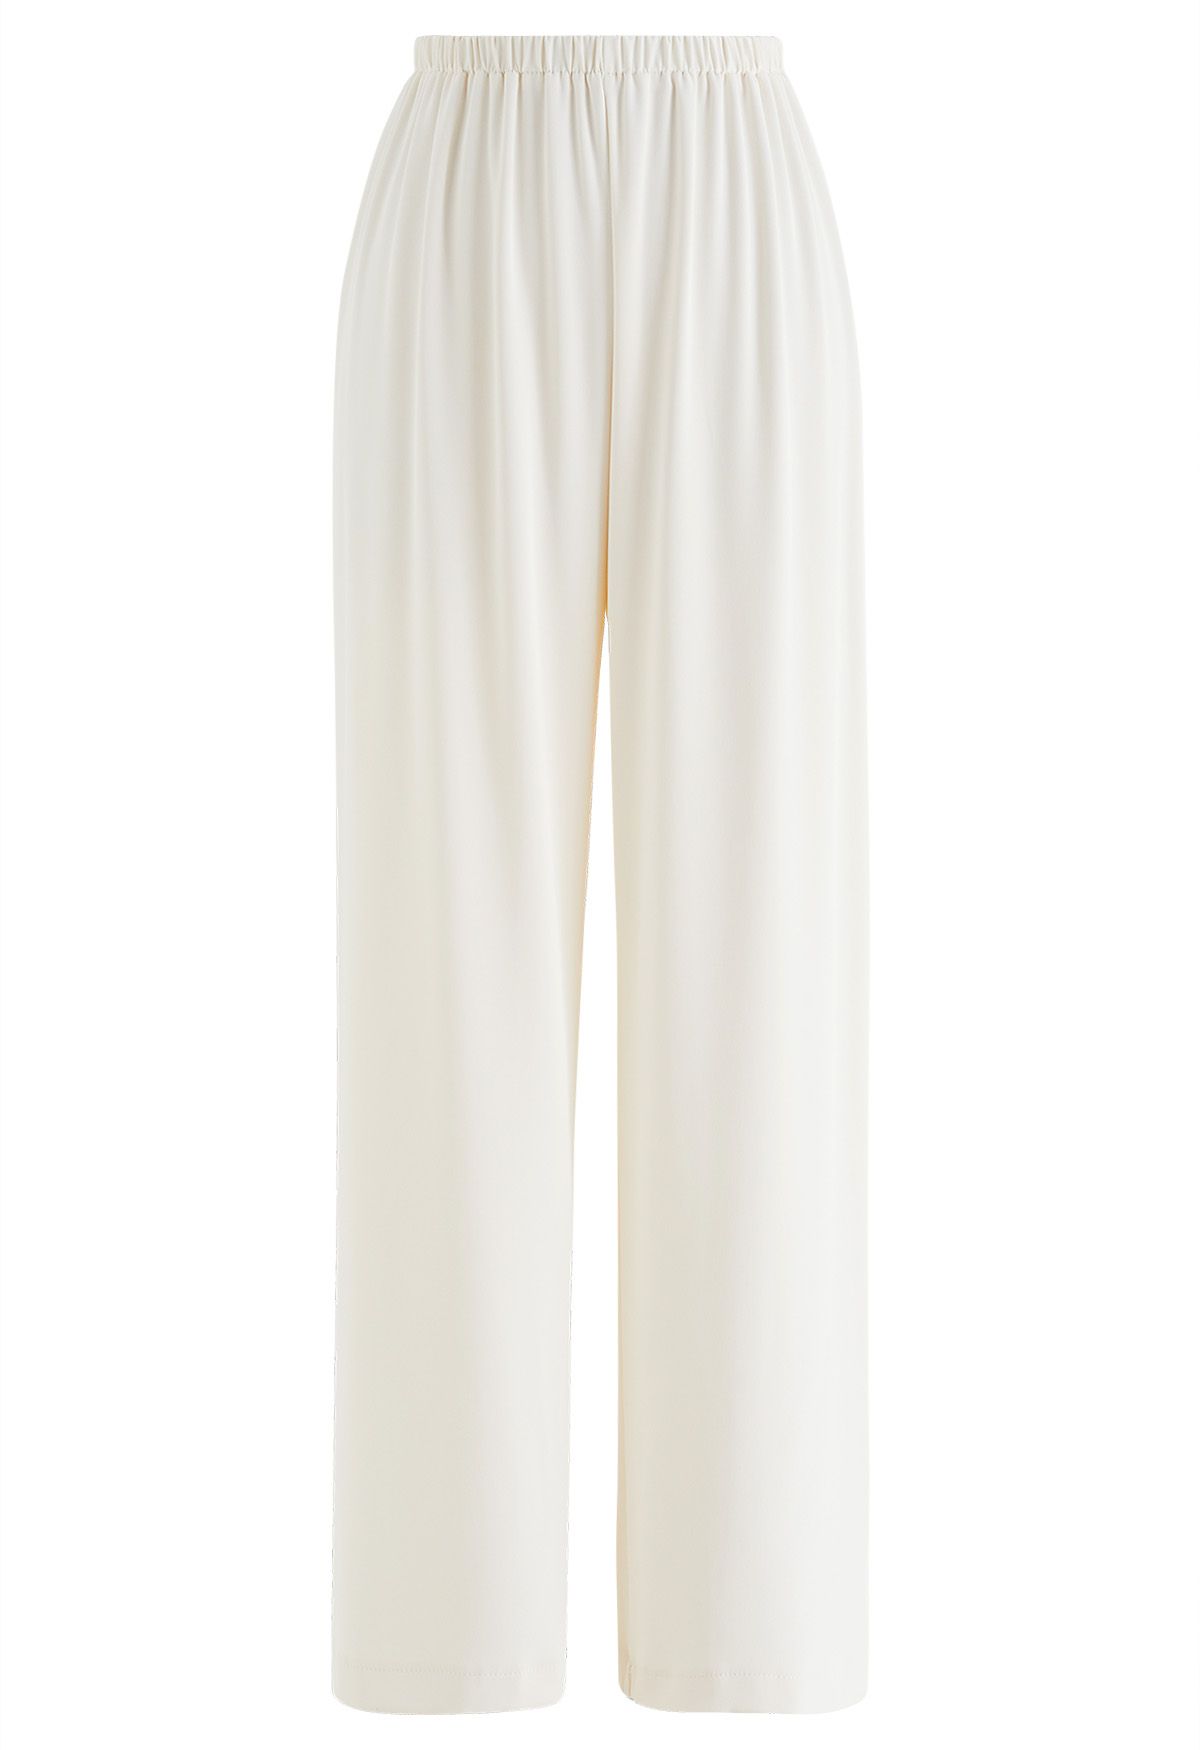 Smooth Satin Pull-On Pants in Cream - Retro, Indie and Unique Fashion